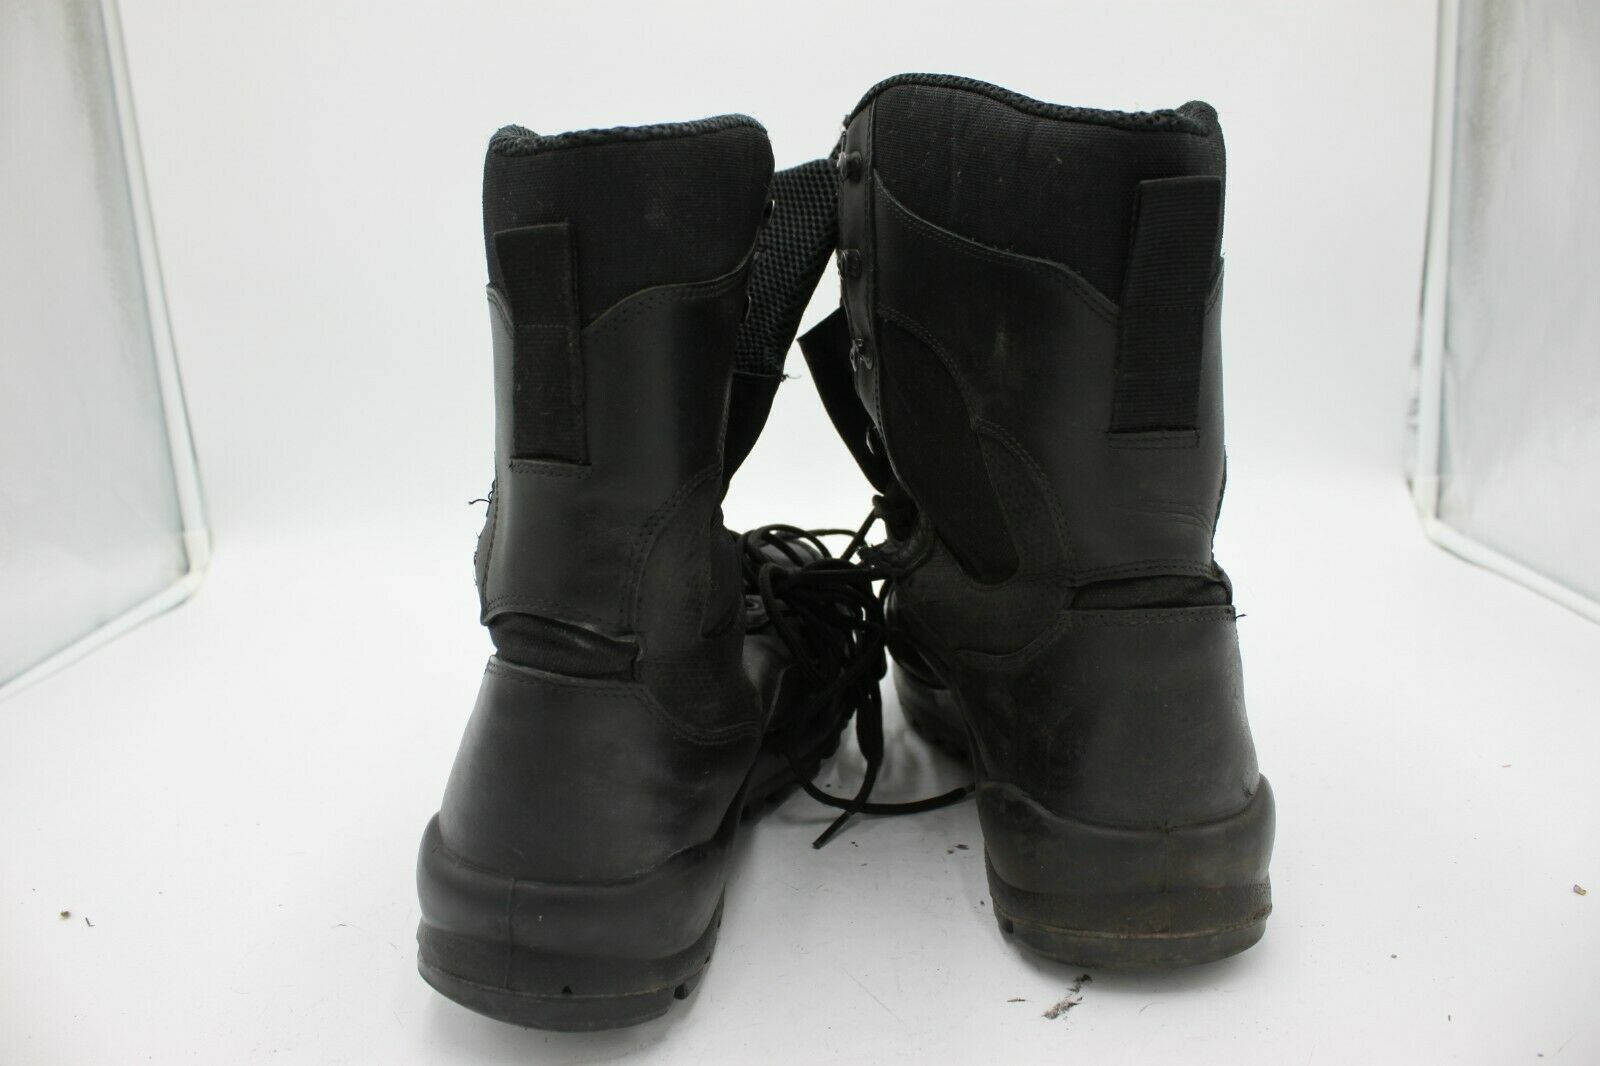 Austrian Military Jungle Combat Boots Stumpp & Baier Lightweight Used Size 12 US (ASB312)